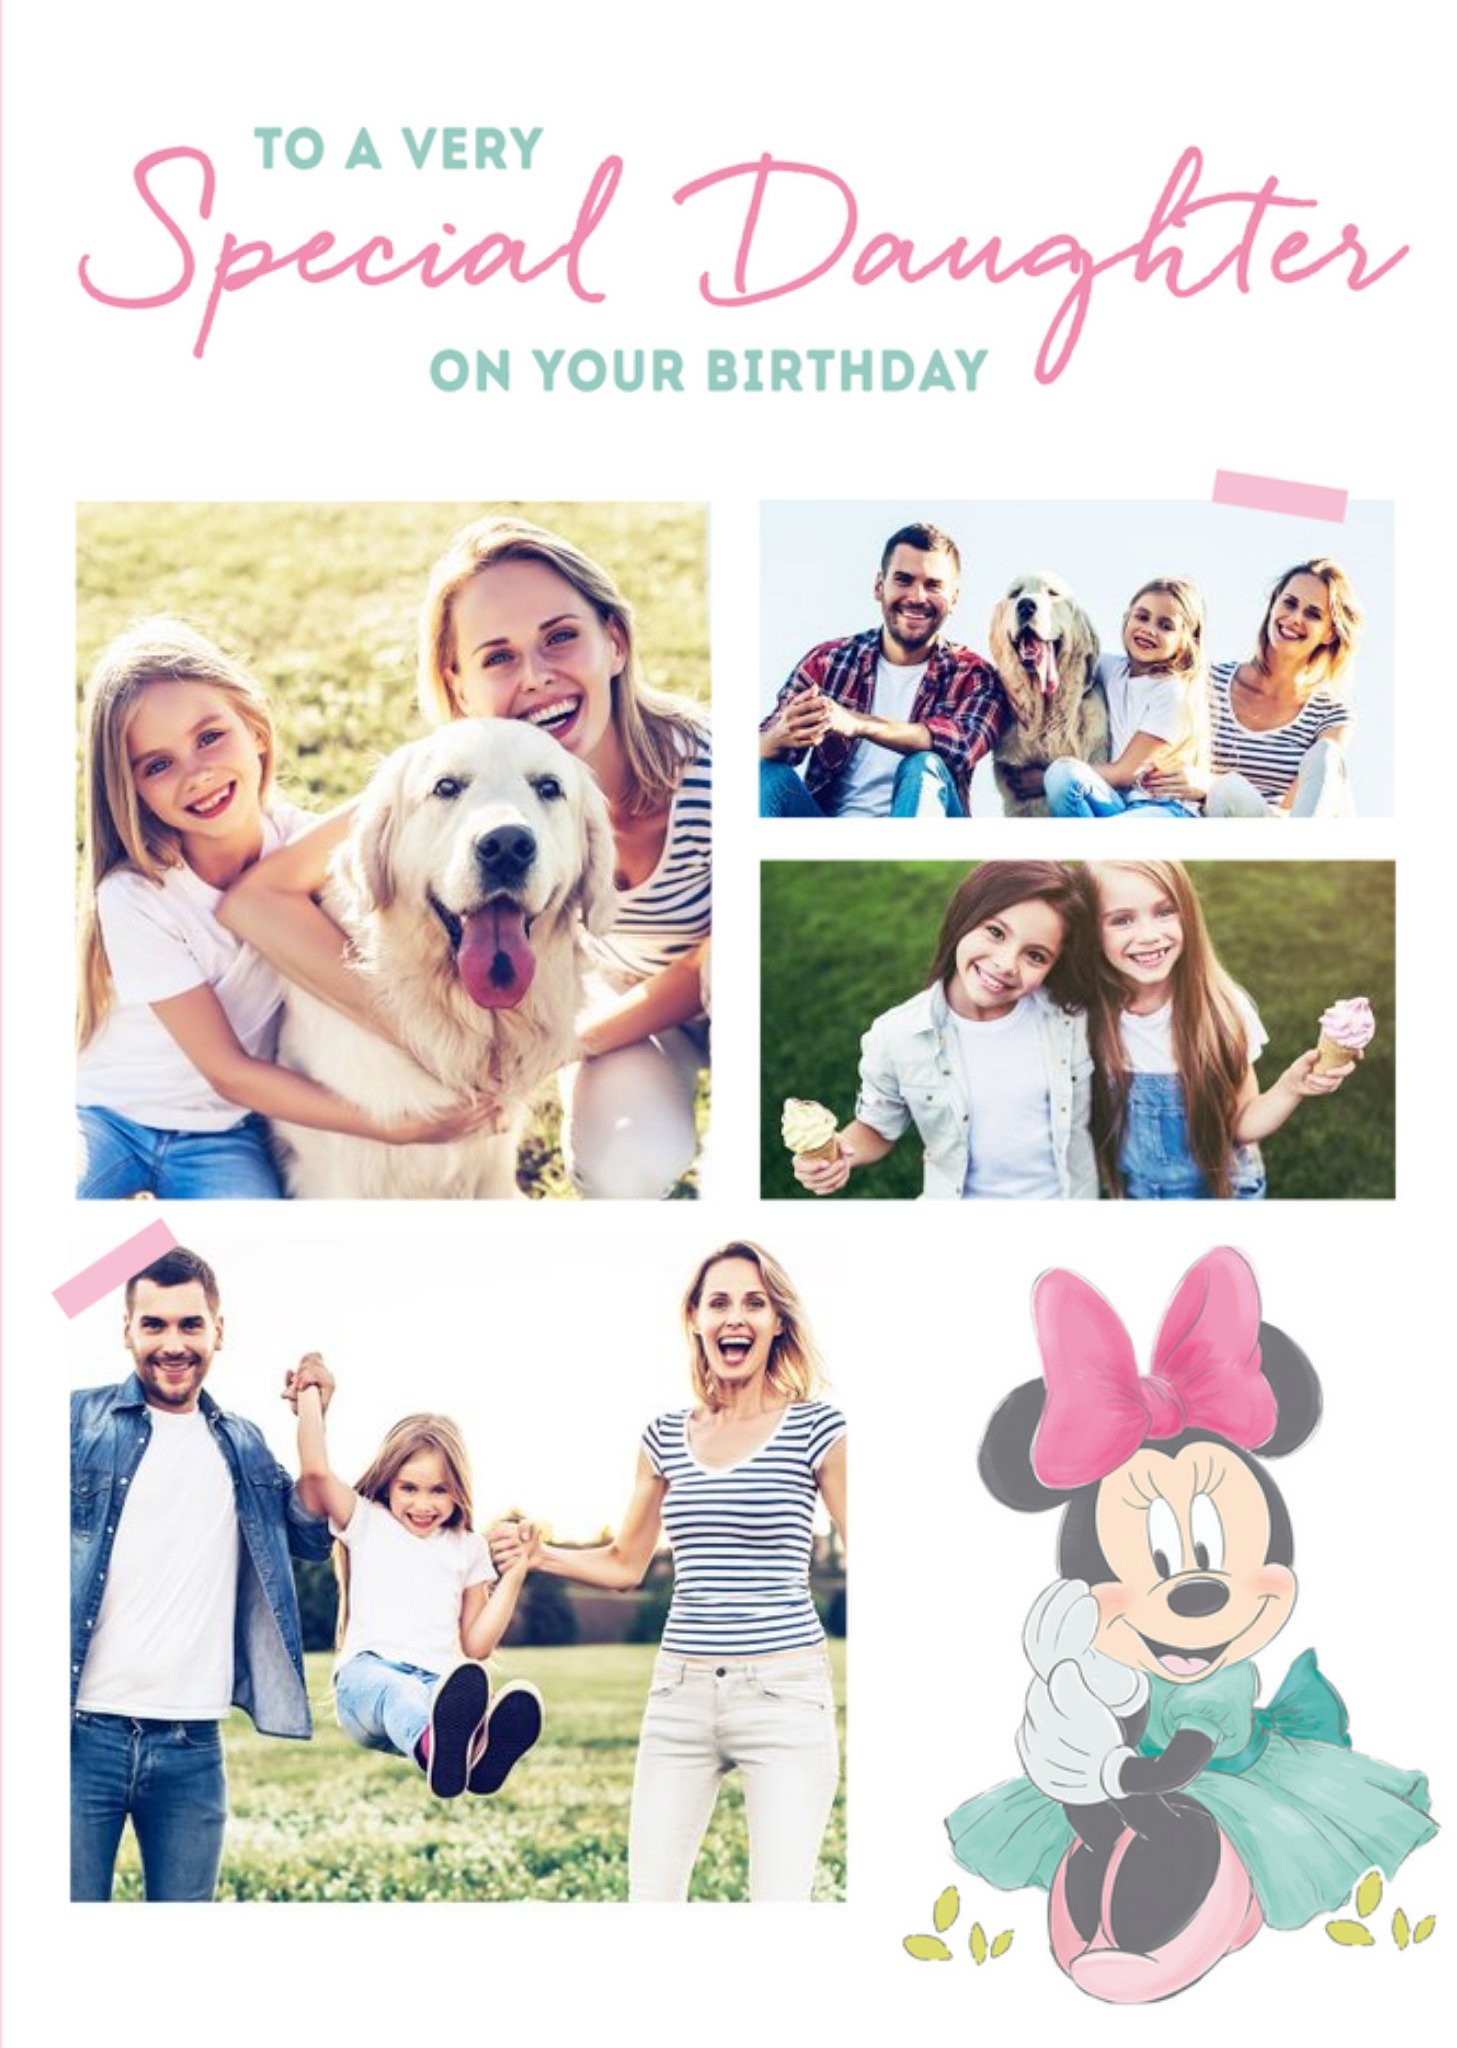 Disney Cute Minnie Birthday Card - Photo Upload - Special Daughter, Large